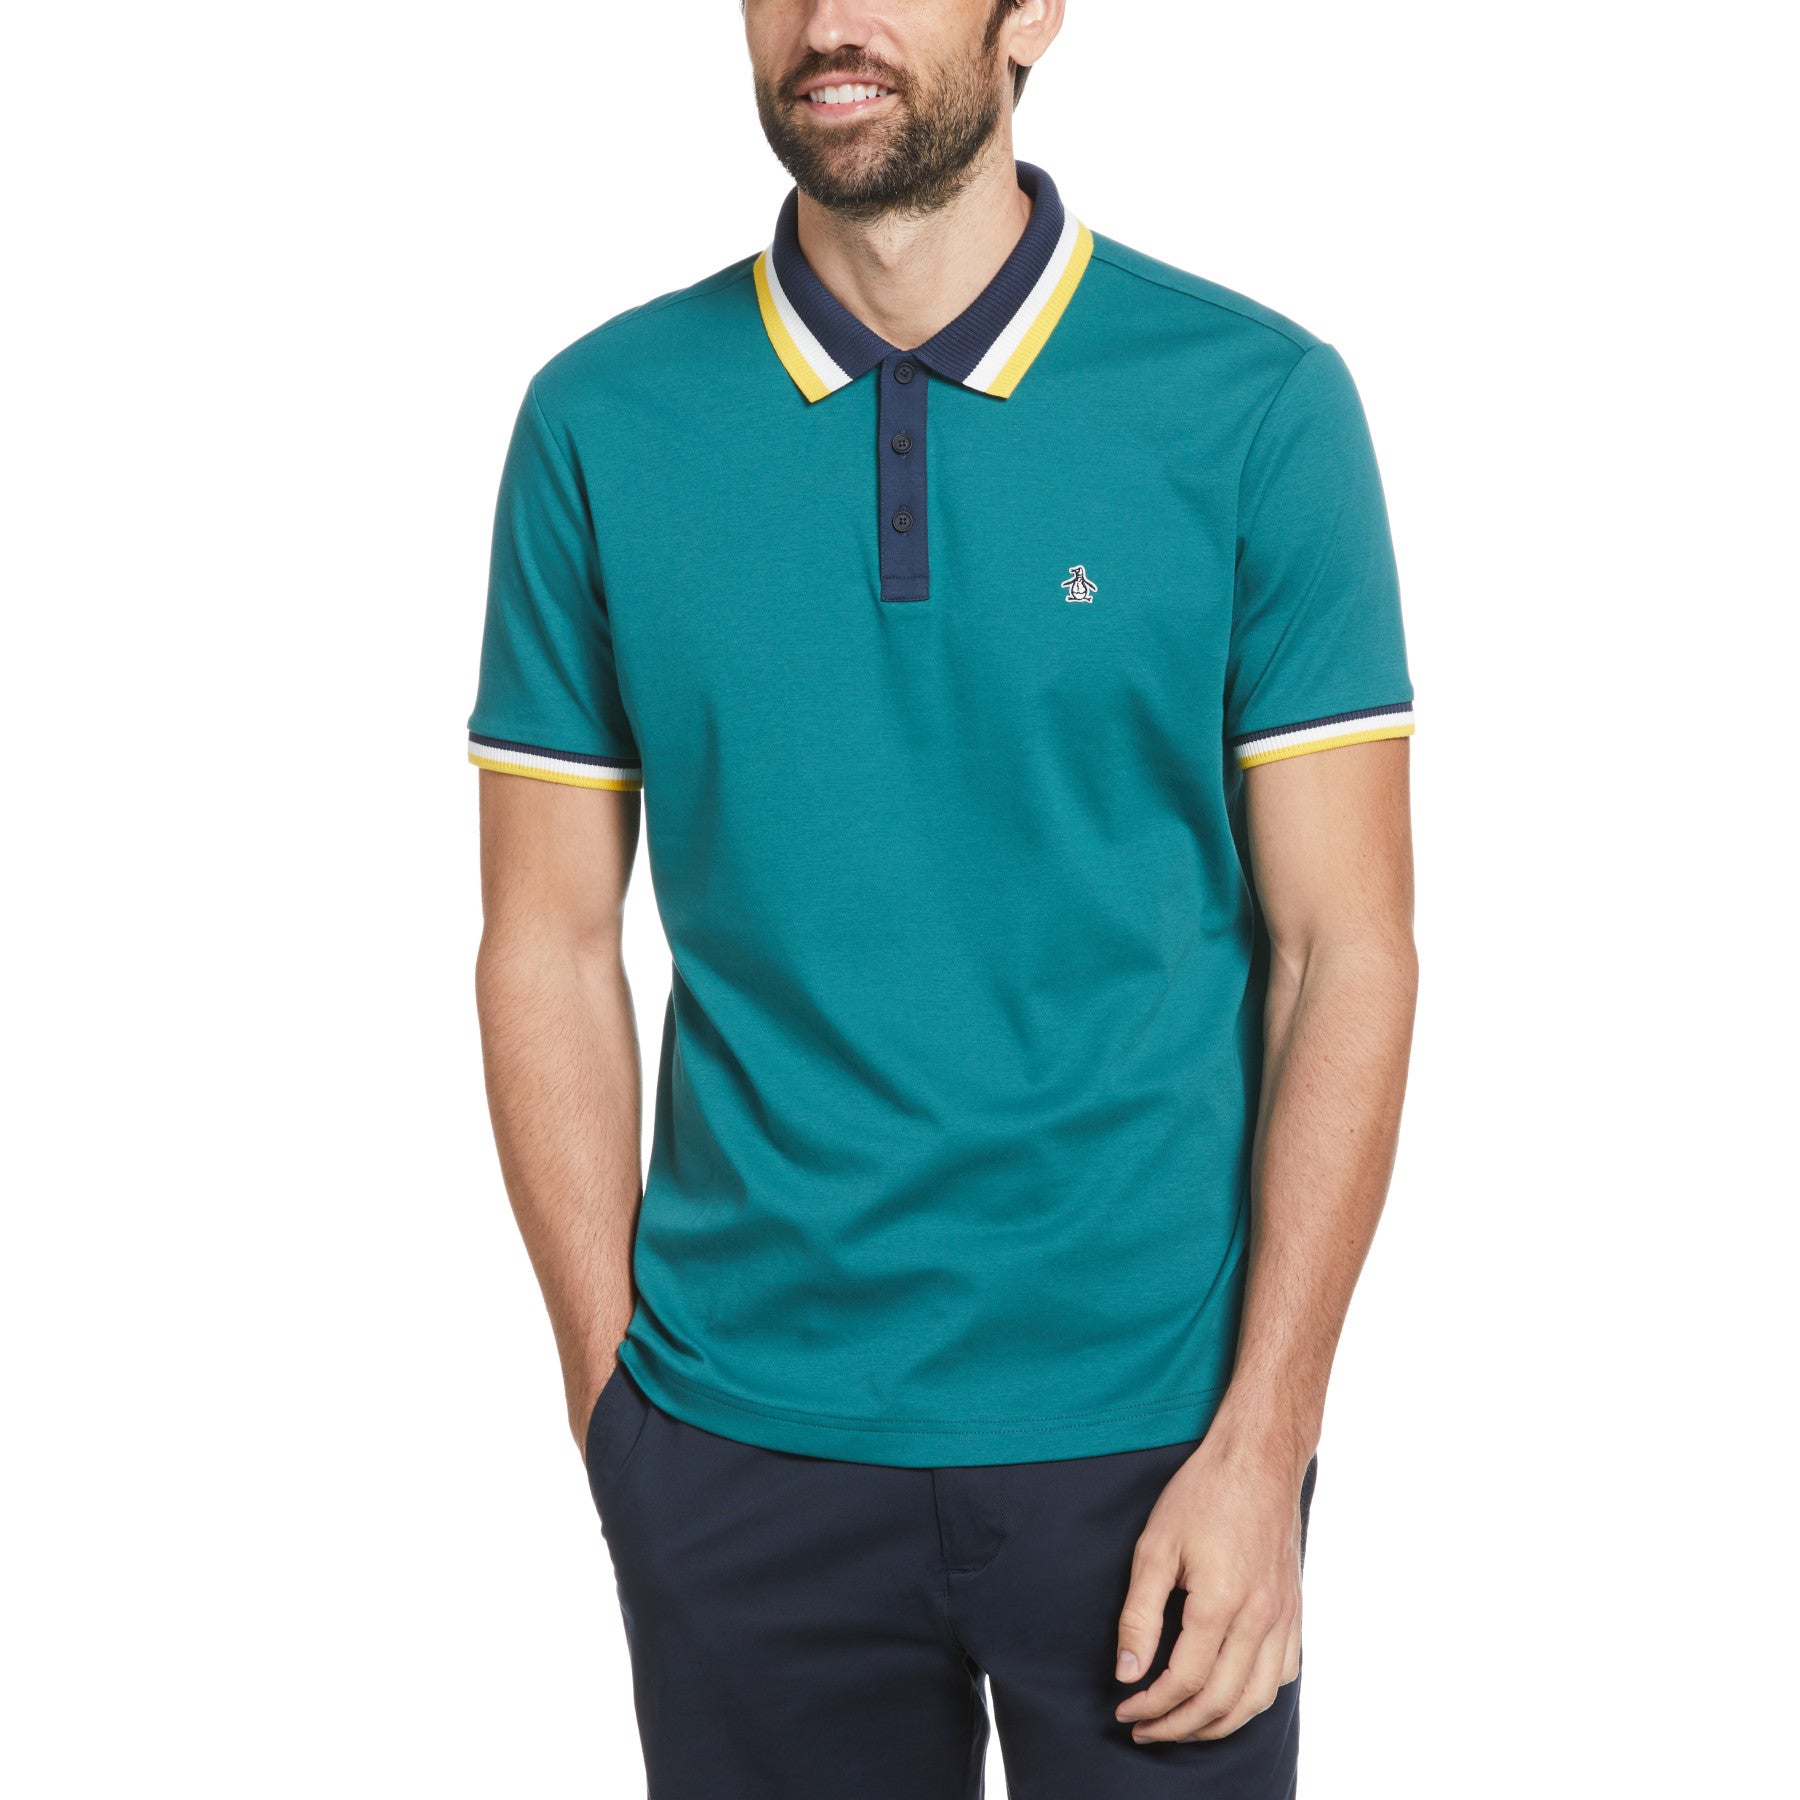 View Ribbed Solid Short Sleeve Polo Shirt In Pacific information